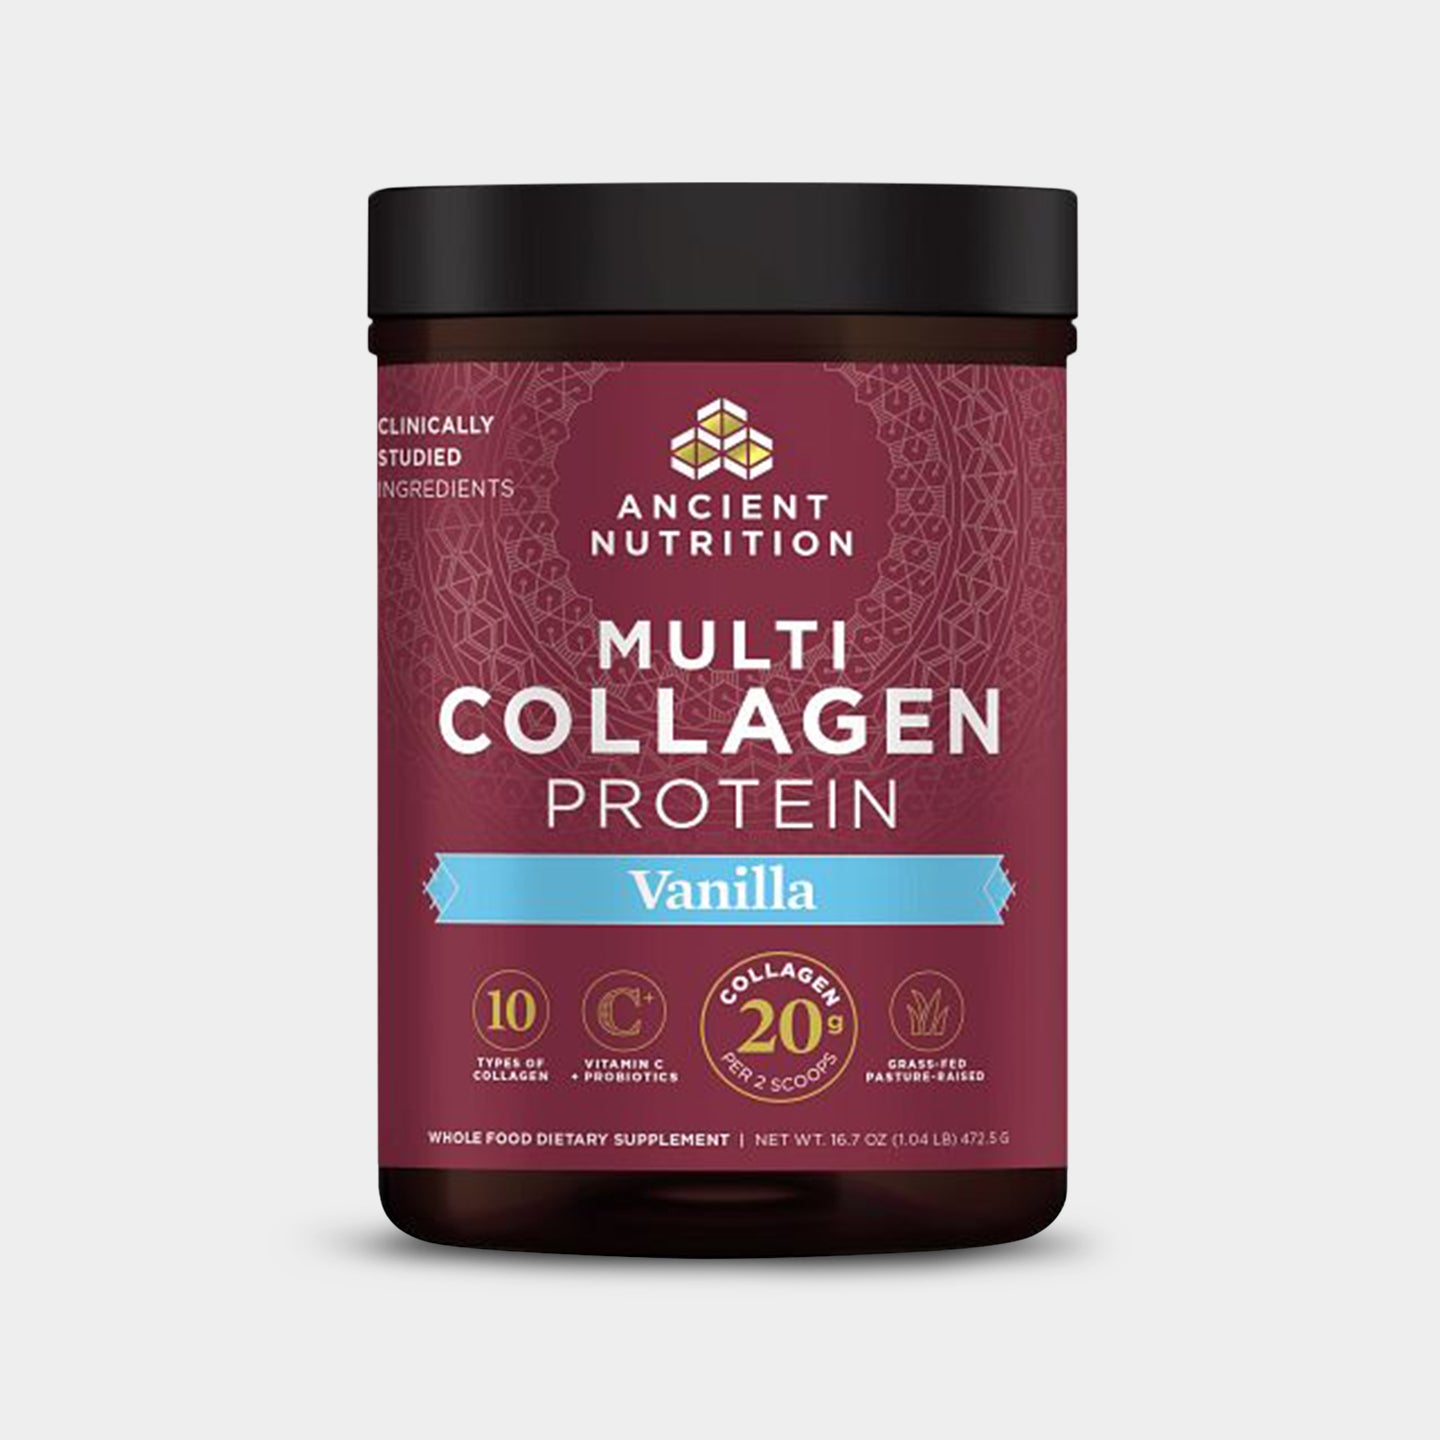 Ancient Nutrition Multi Collagen Protein - 20g, Vanilla, 45 Servings A1